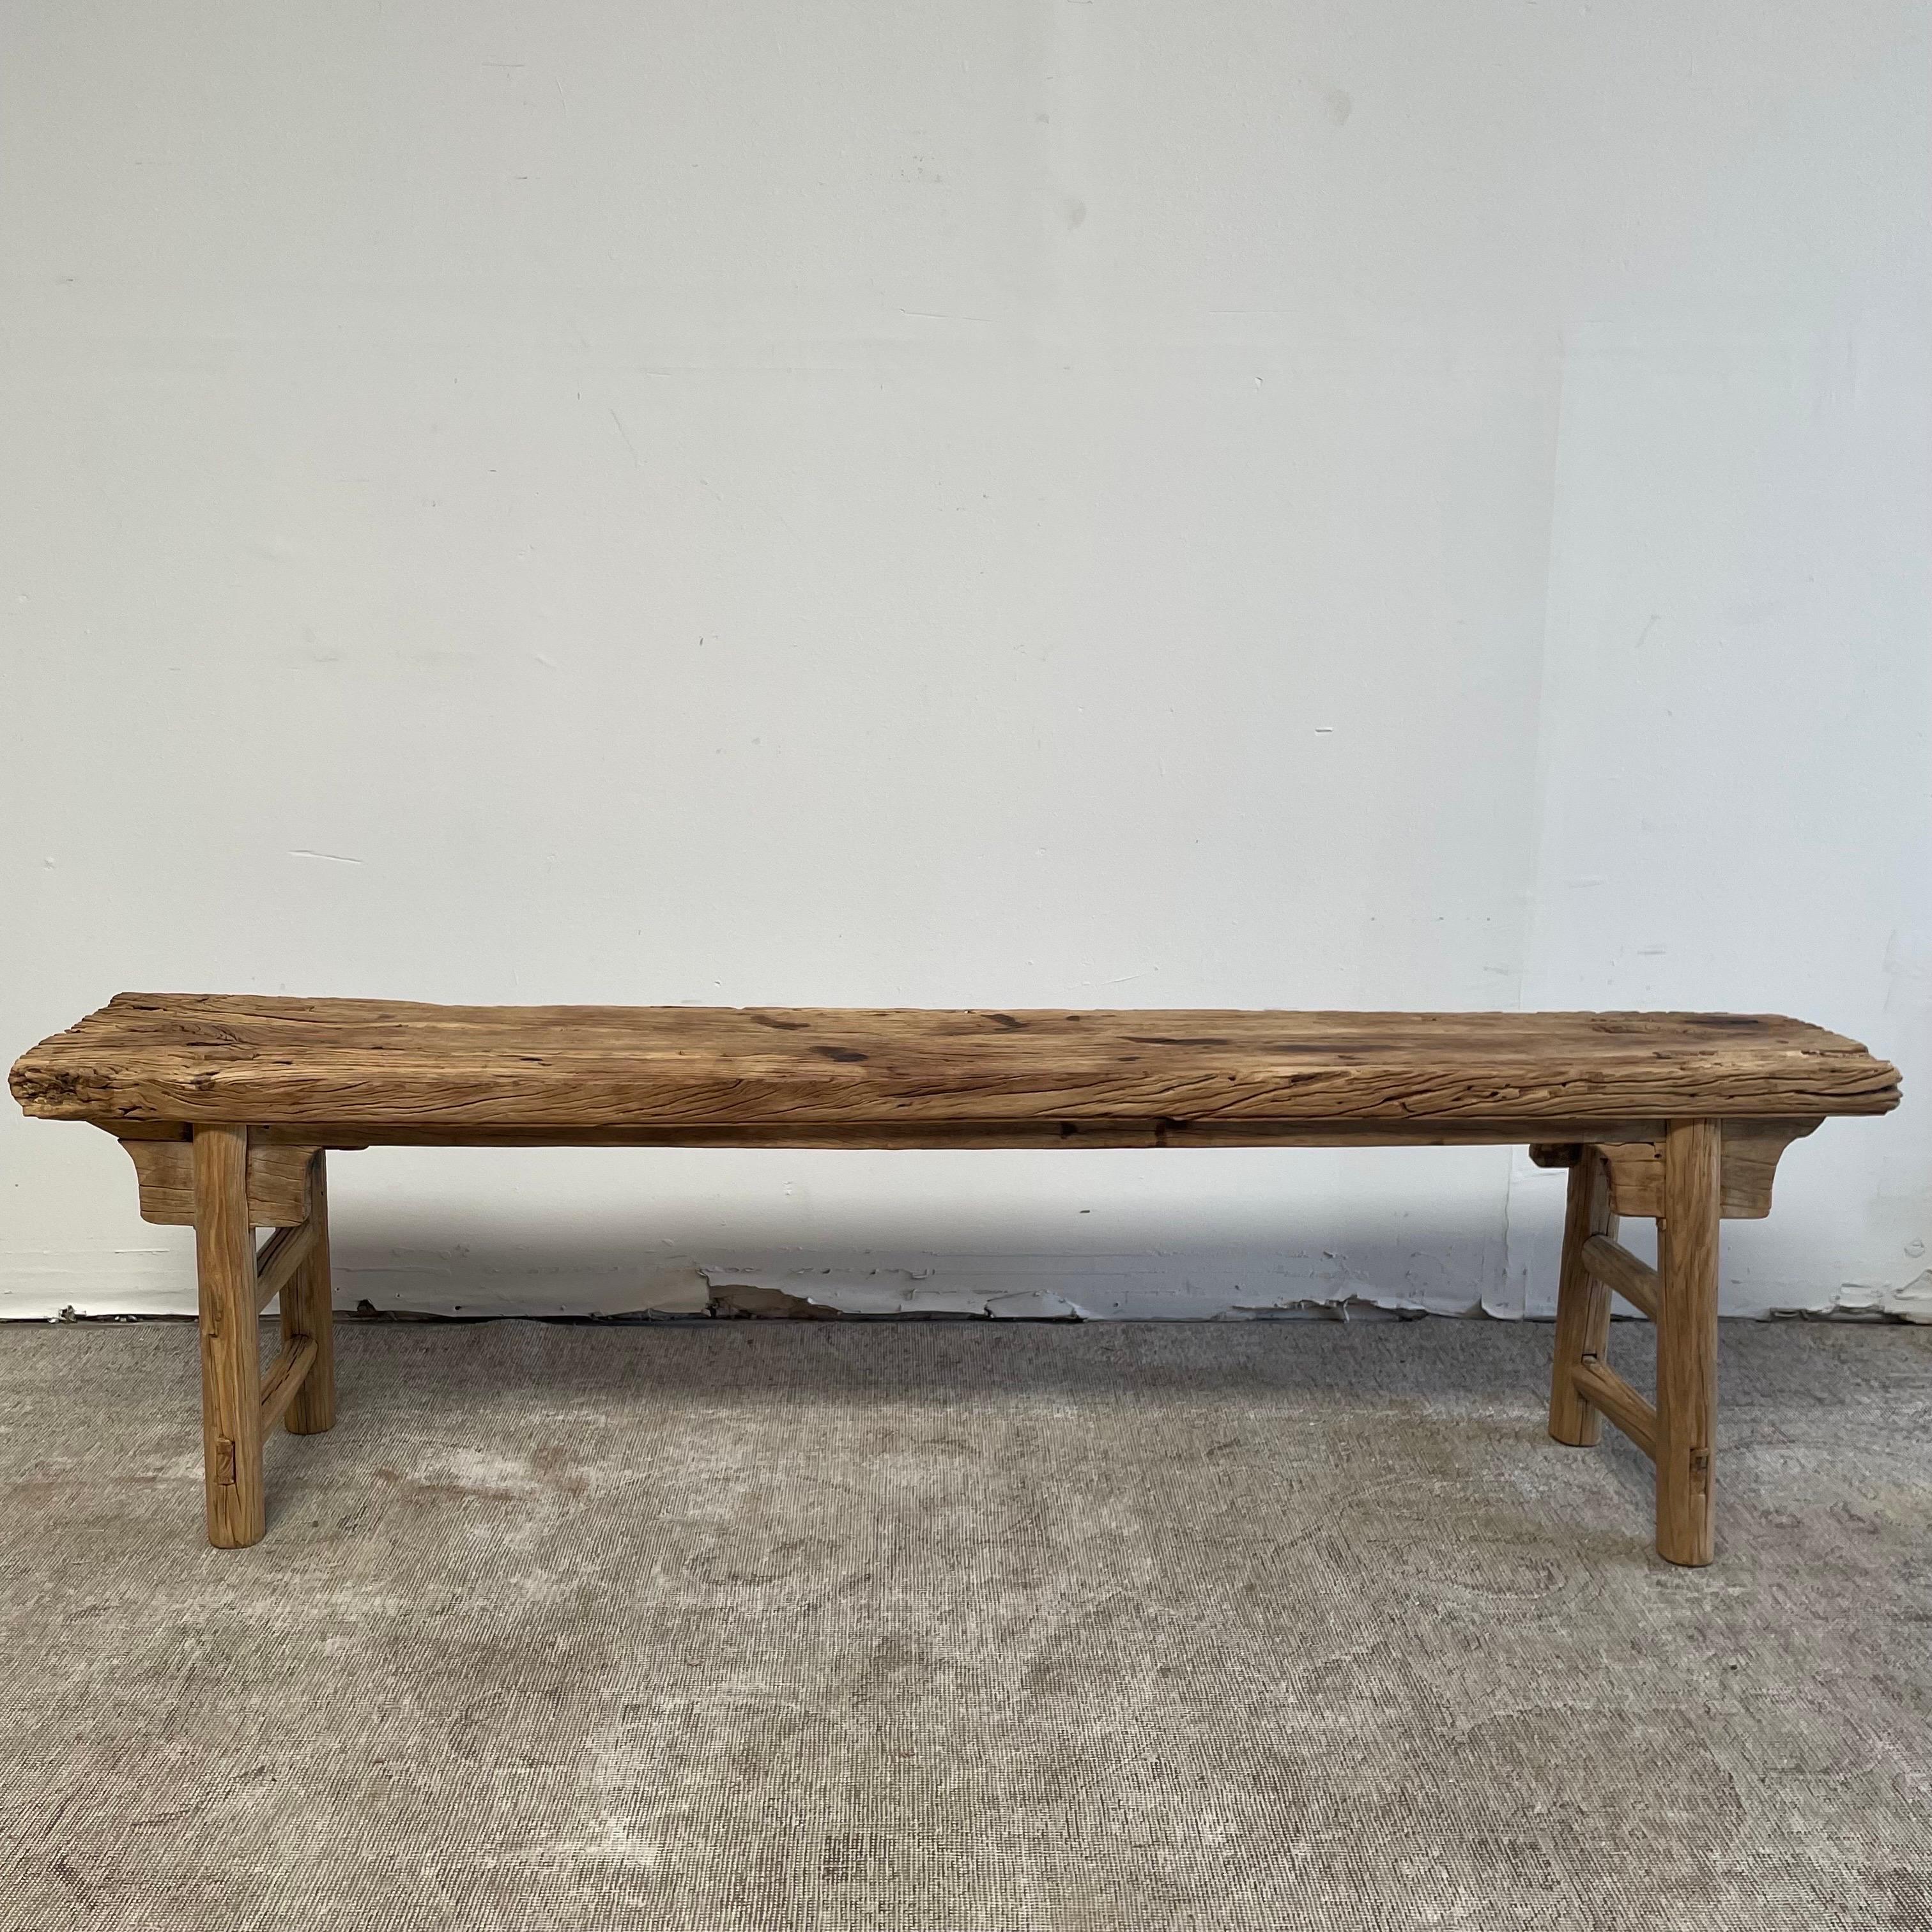 20th Century Vintage Elm Wood Bench with Apron